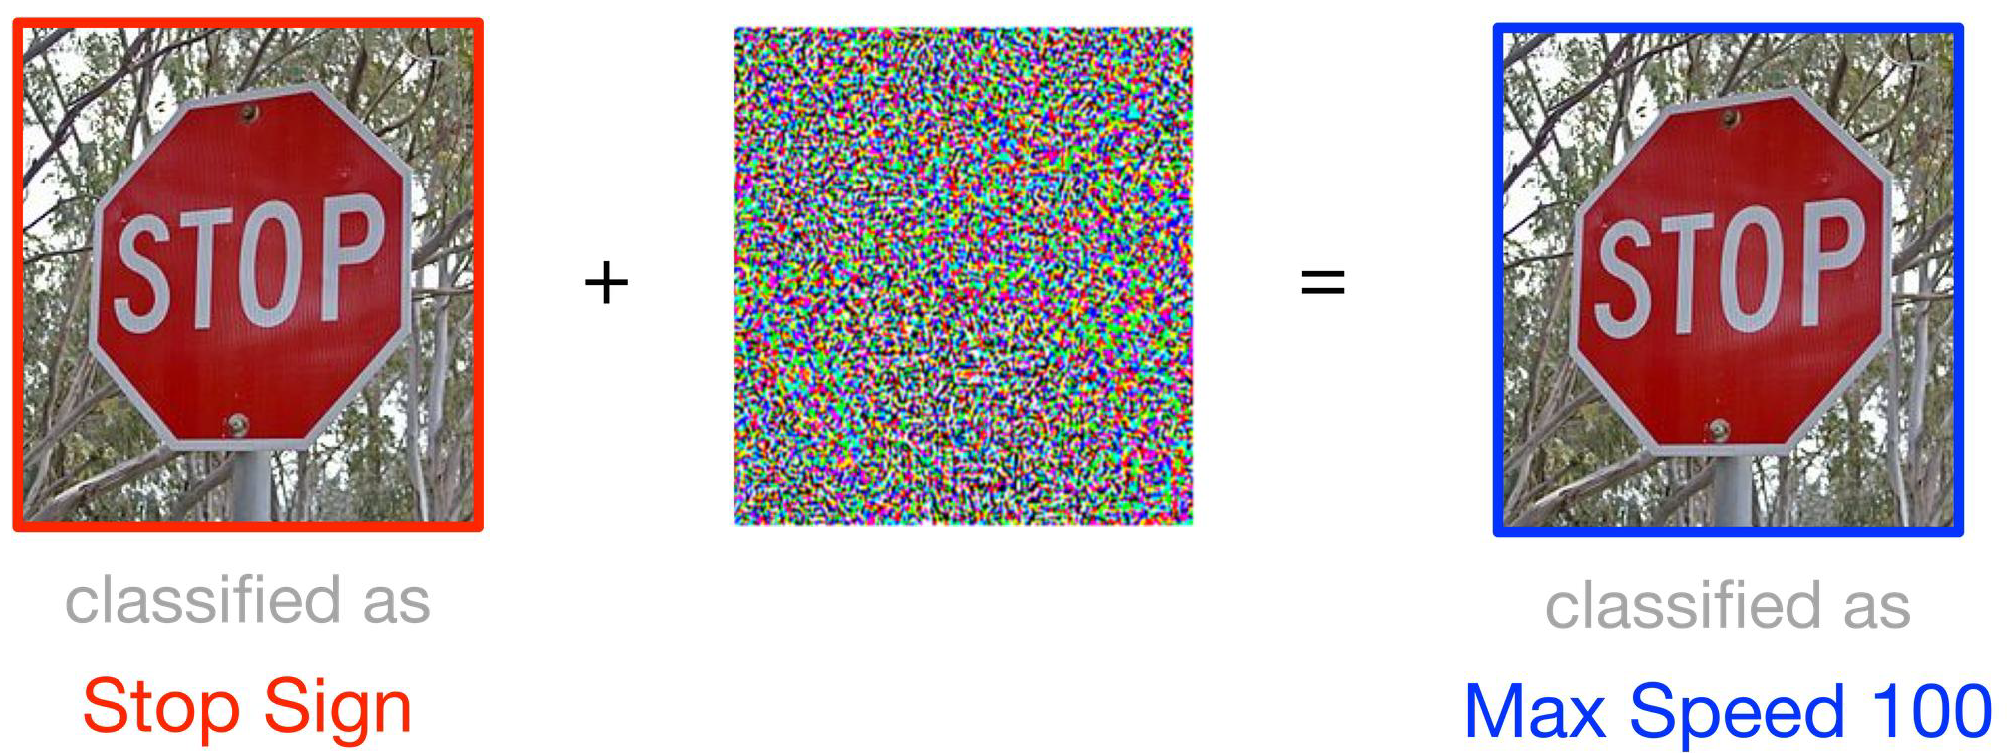 Famous adversarial example.